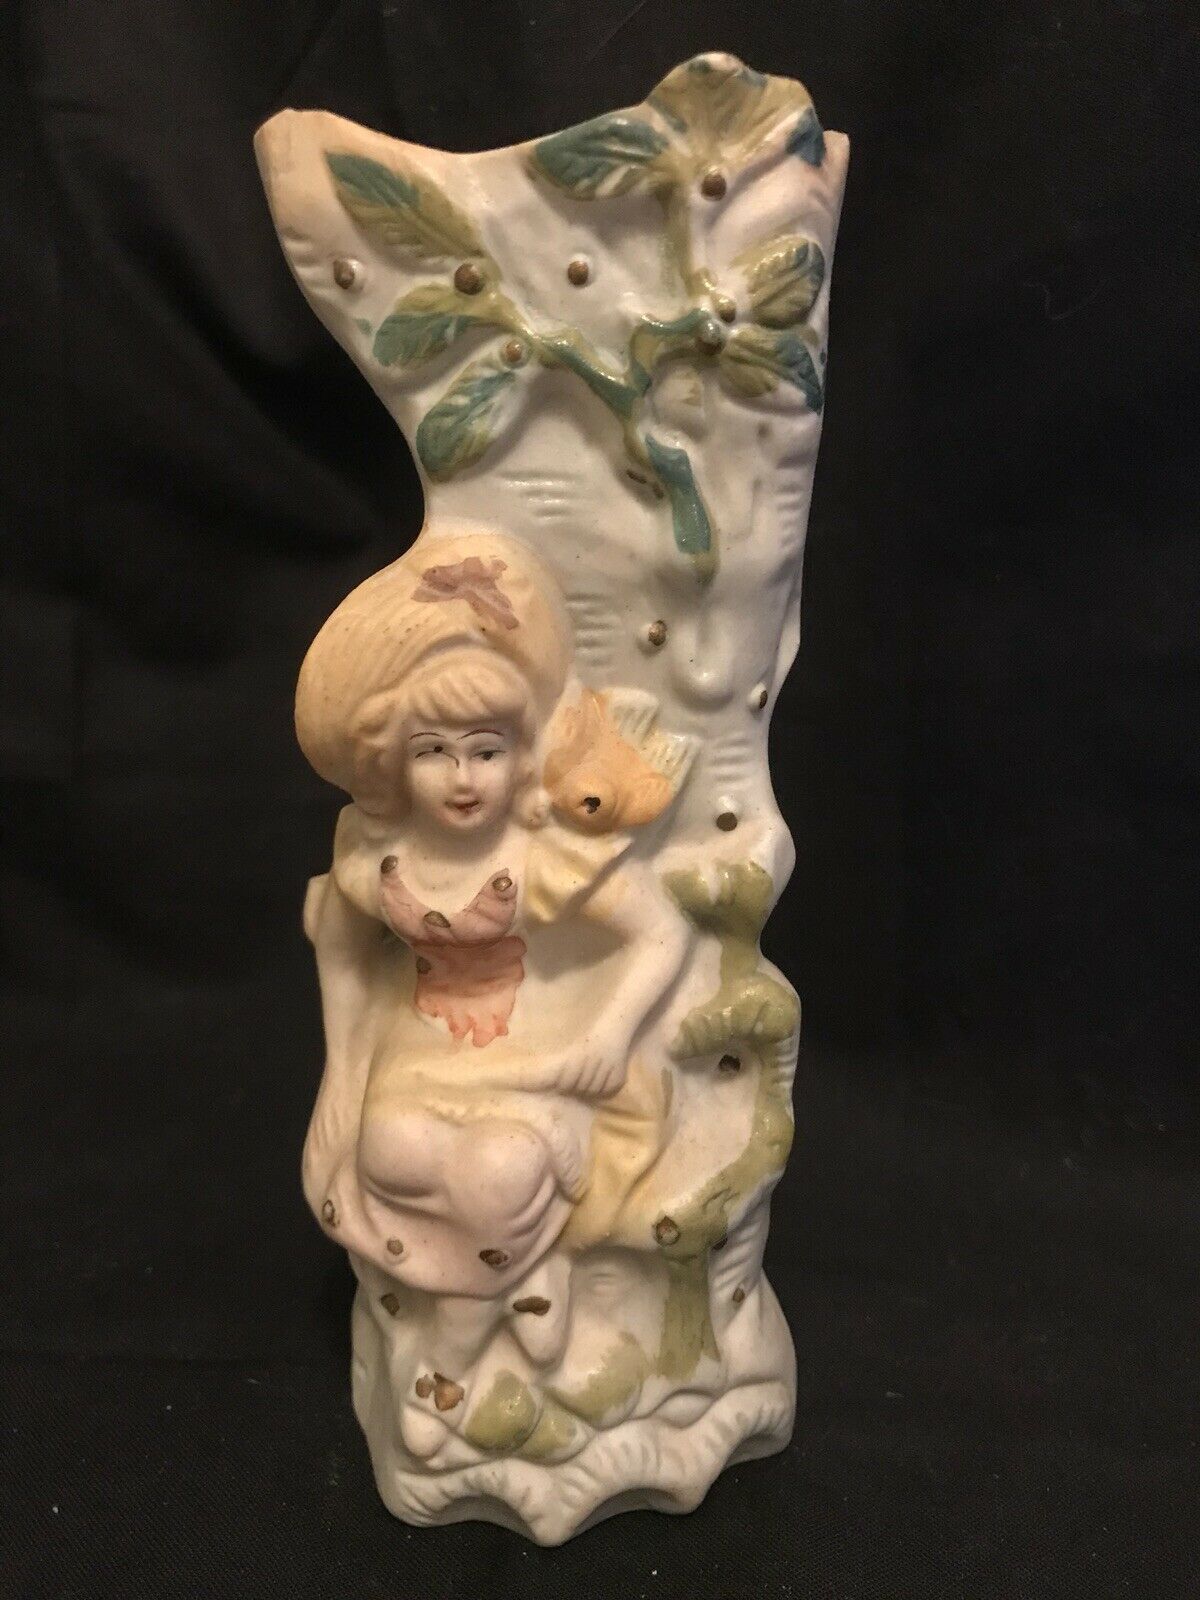 Vintage Wall Pocket Bud Vase Girl Sitting With Bird  By Tree. Hand Painted Japan